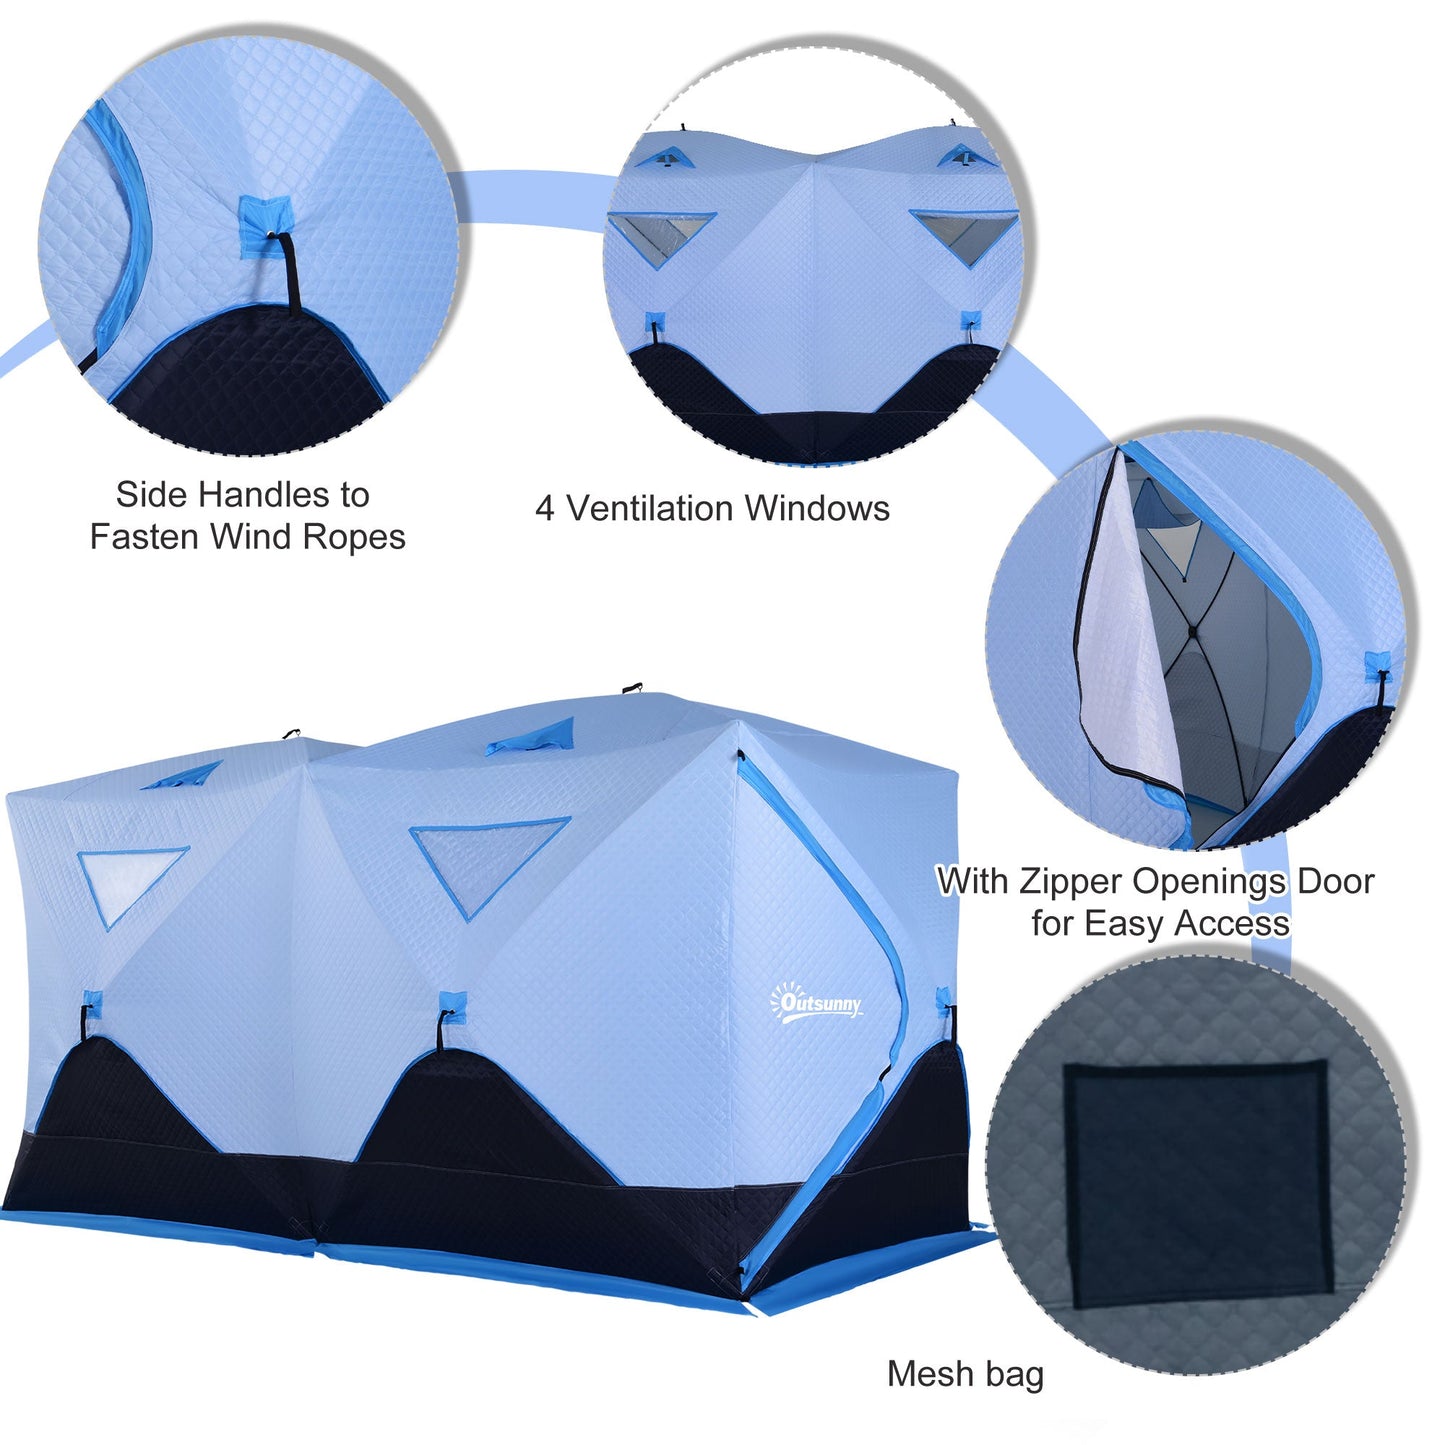 8-Person Pop-up Ice Fishing Tent, Insulated Ice Fishing Shelter with Ventilation Windows, Double Doors and Carry Bag, for Low-Temp -22℉ at Gallery Canada